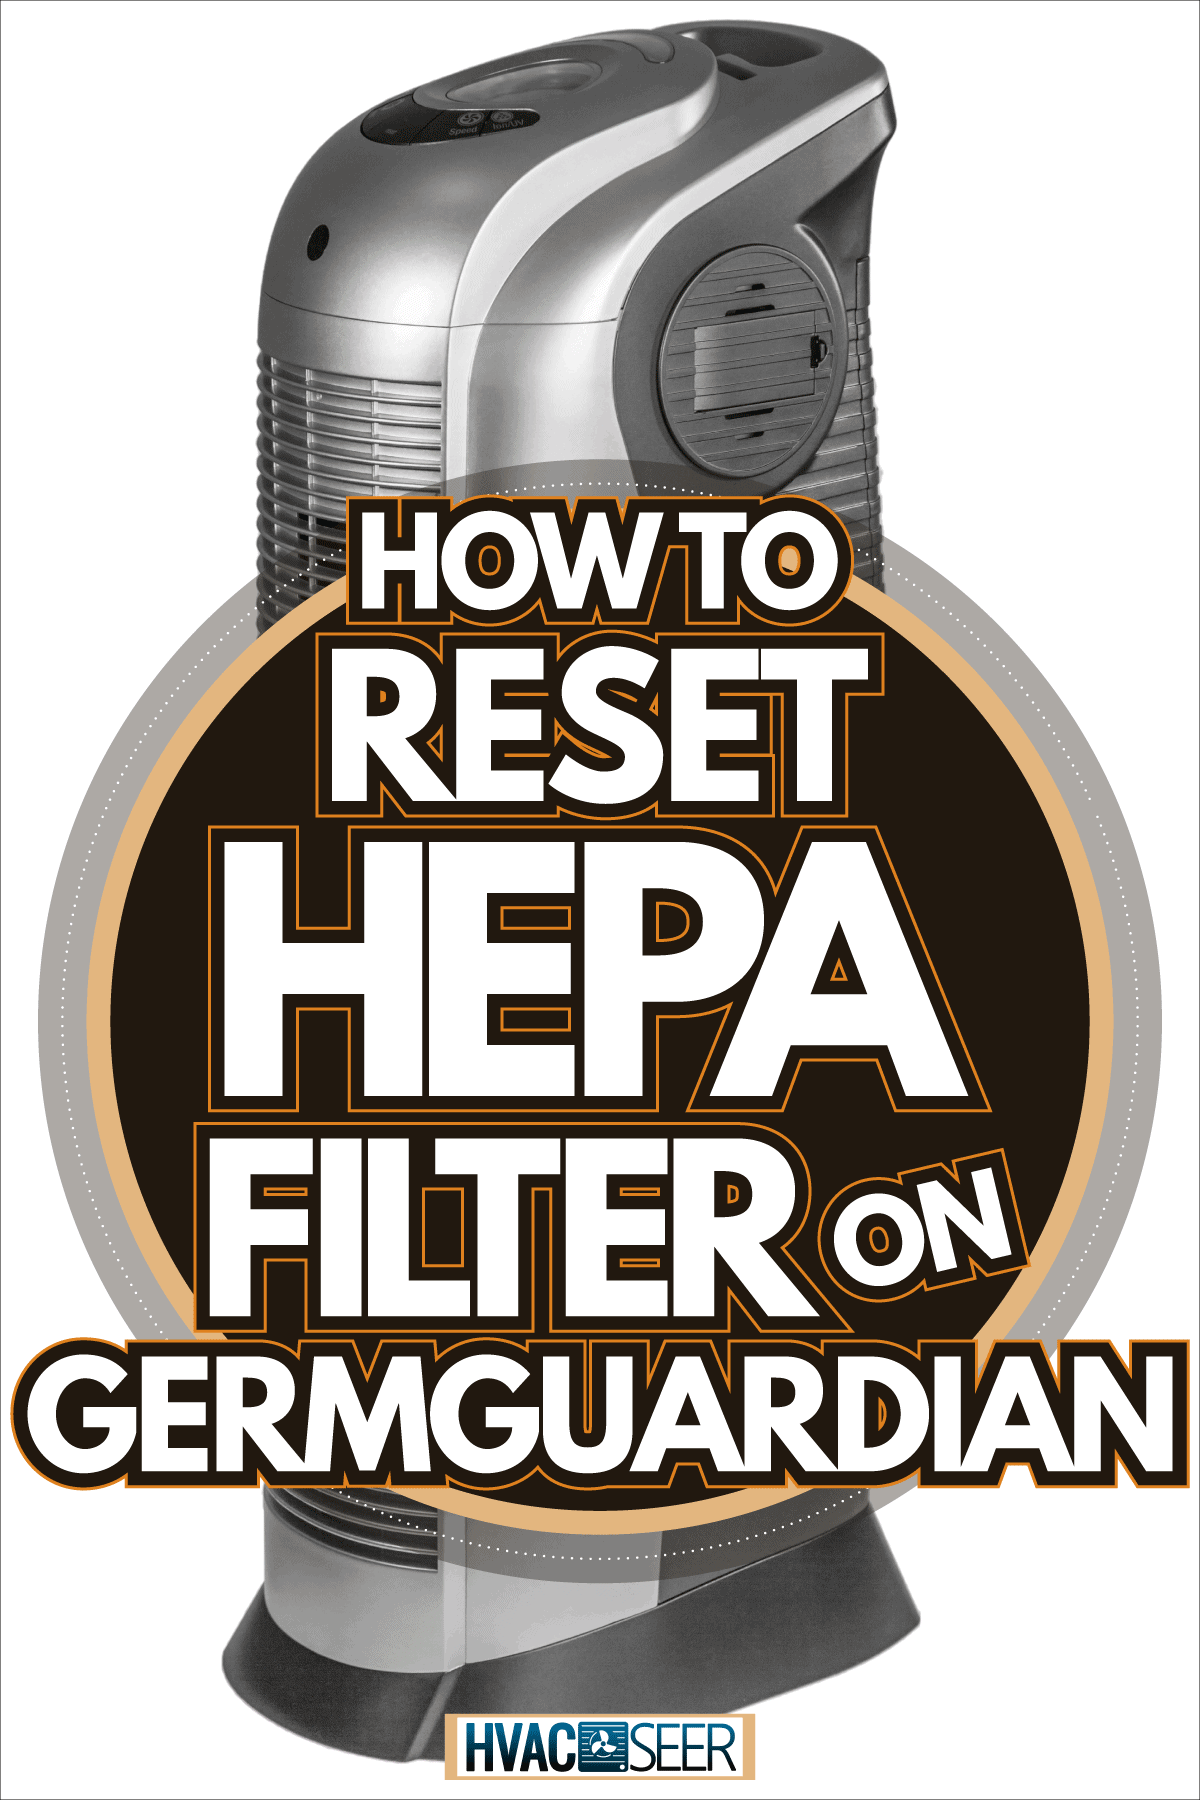 Air Purifier Brand New and Gorgeous, How To Reset HEPA Filter On GermGuardian